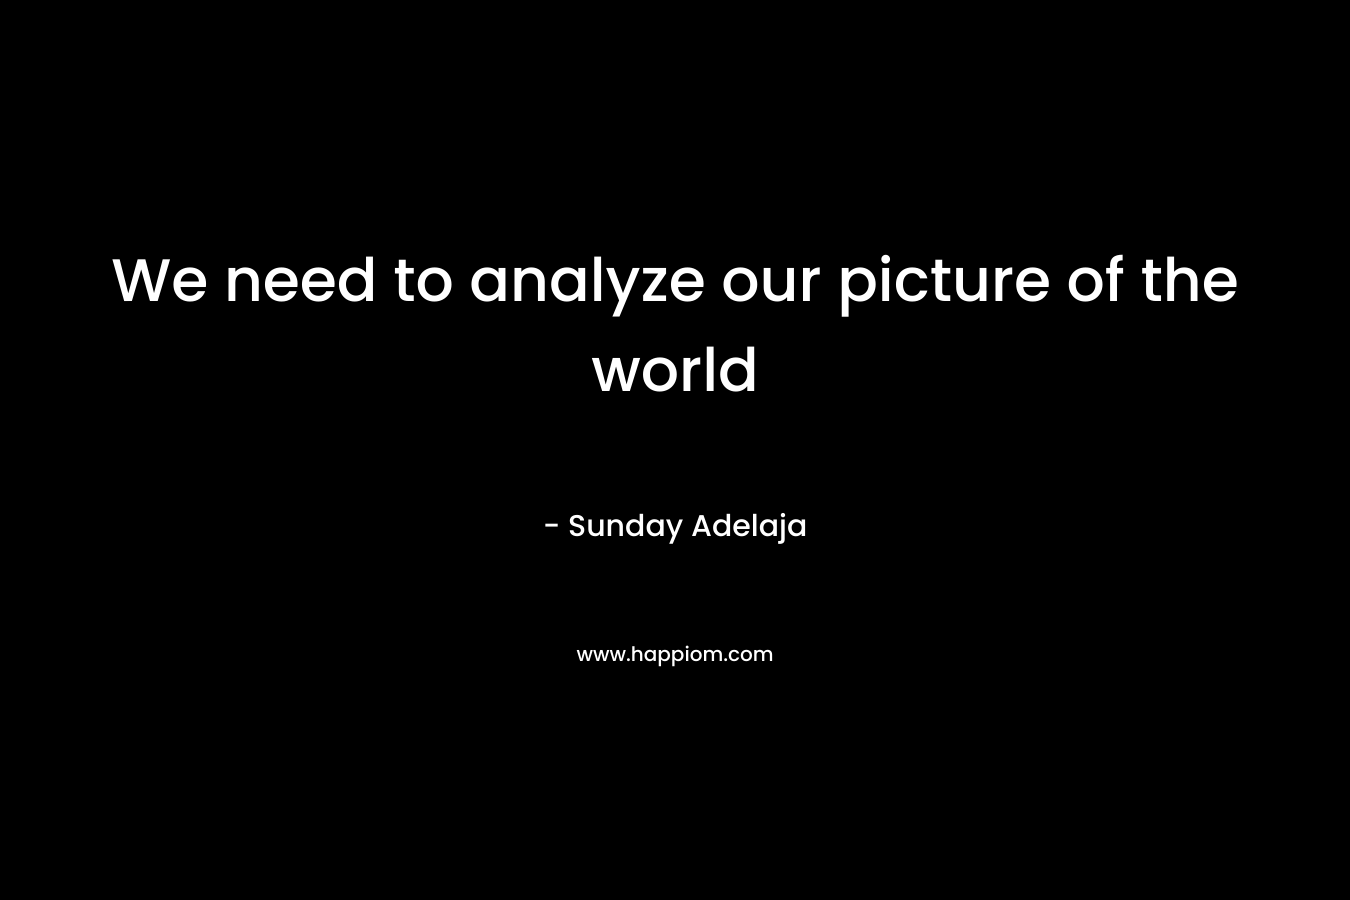 We need to analyze our picture of the world